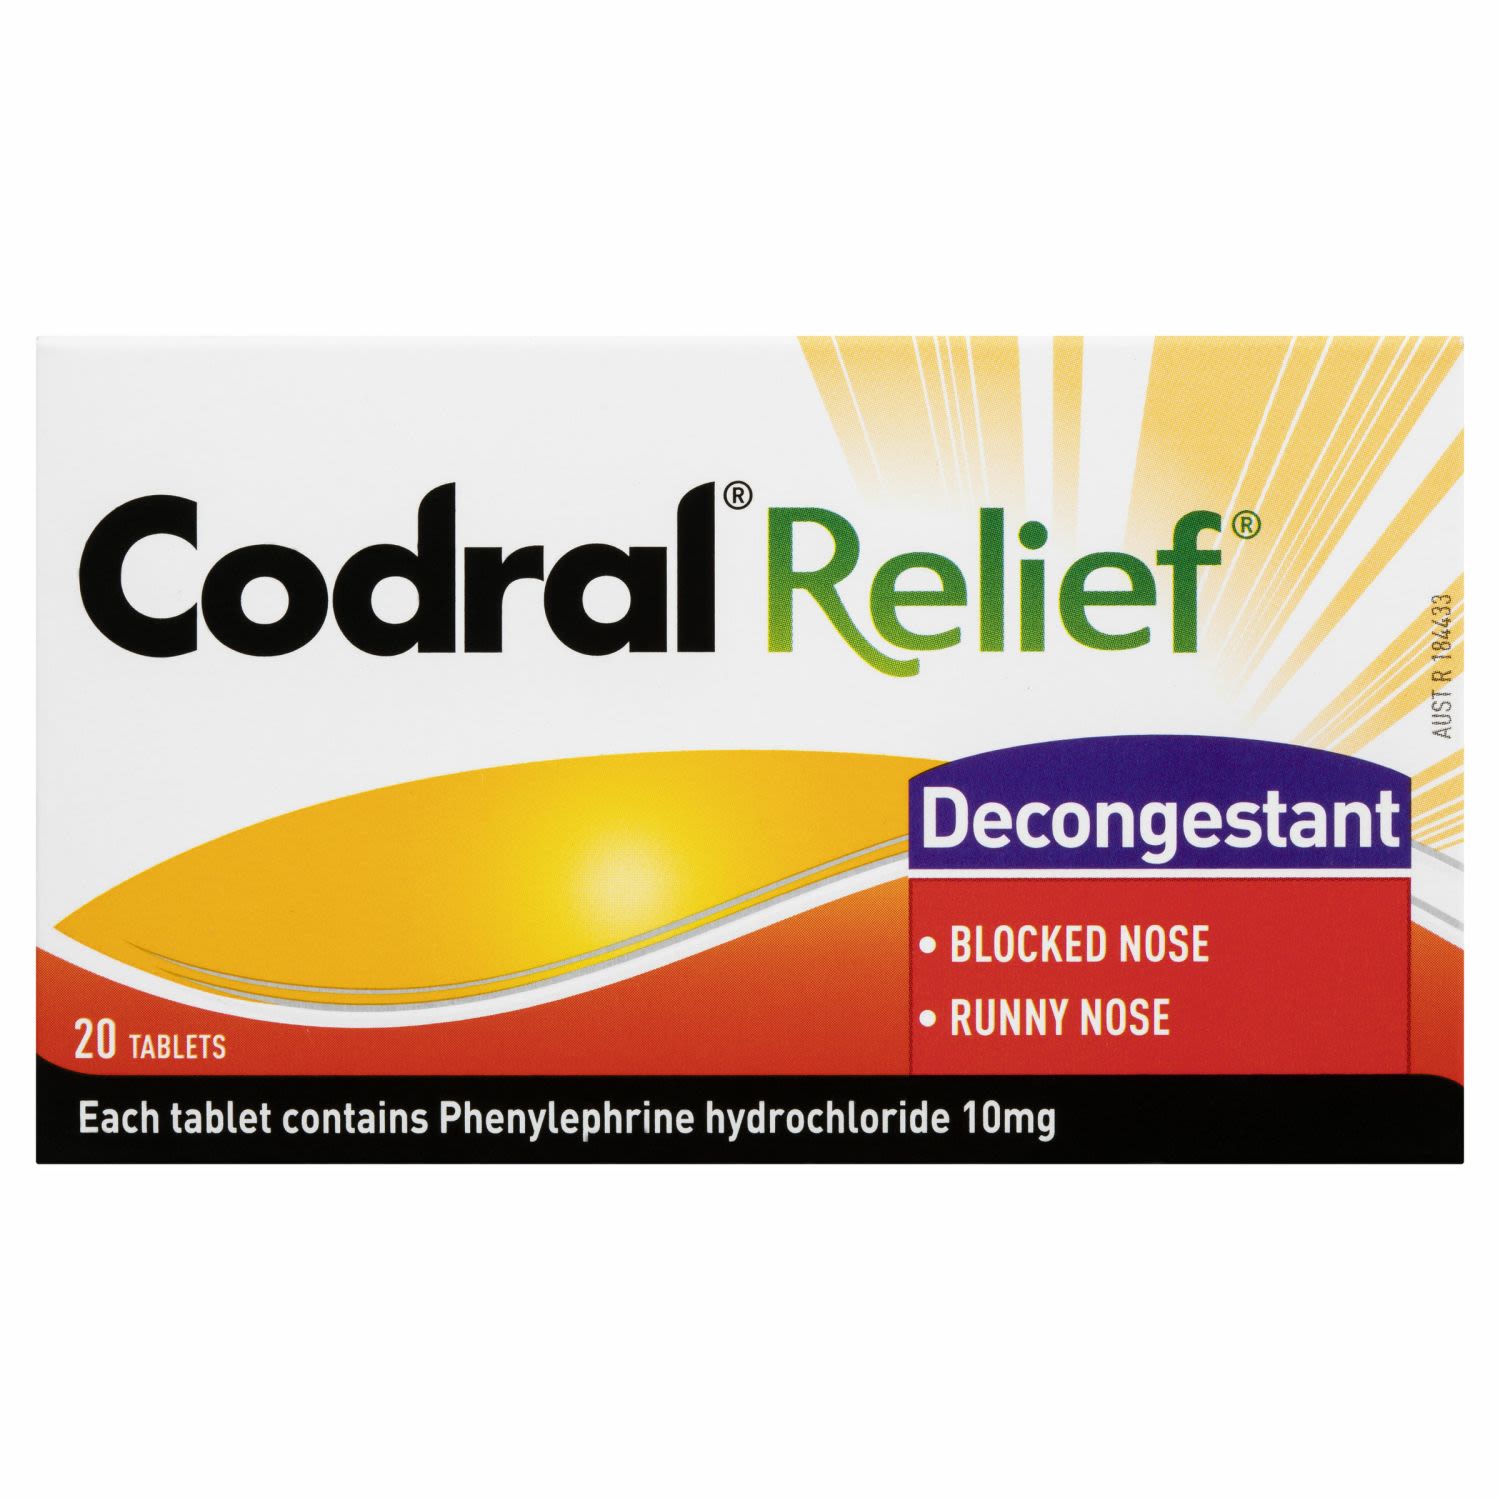 Codral Relief Decongestant Tablets, 20 Each